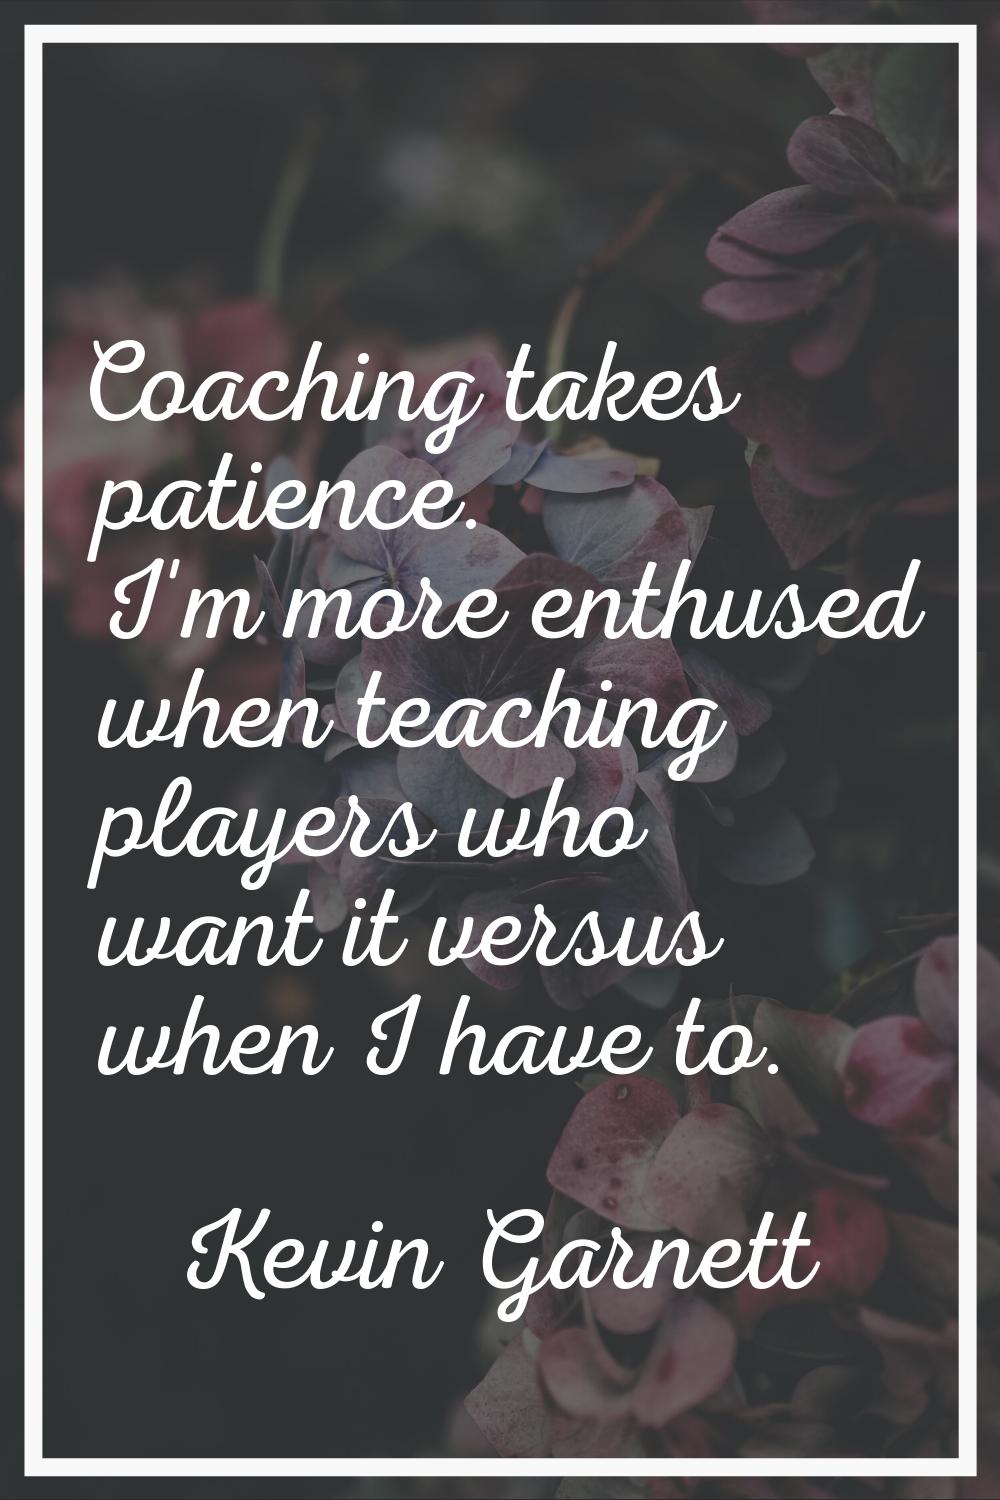 Coaching takes patience. I'm more enthused when teaching players who want it versus when I have to.